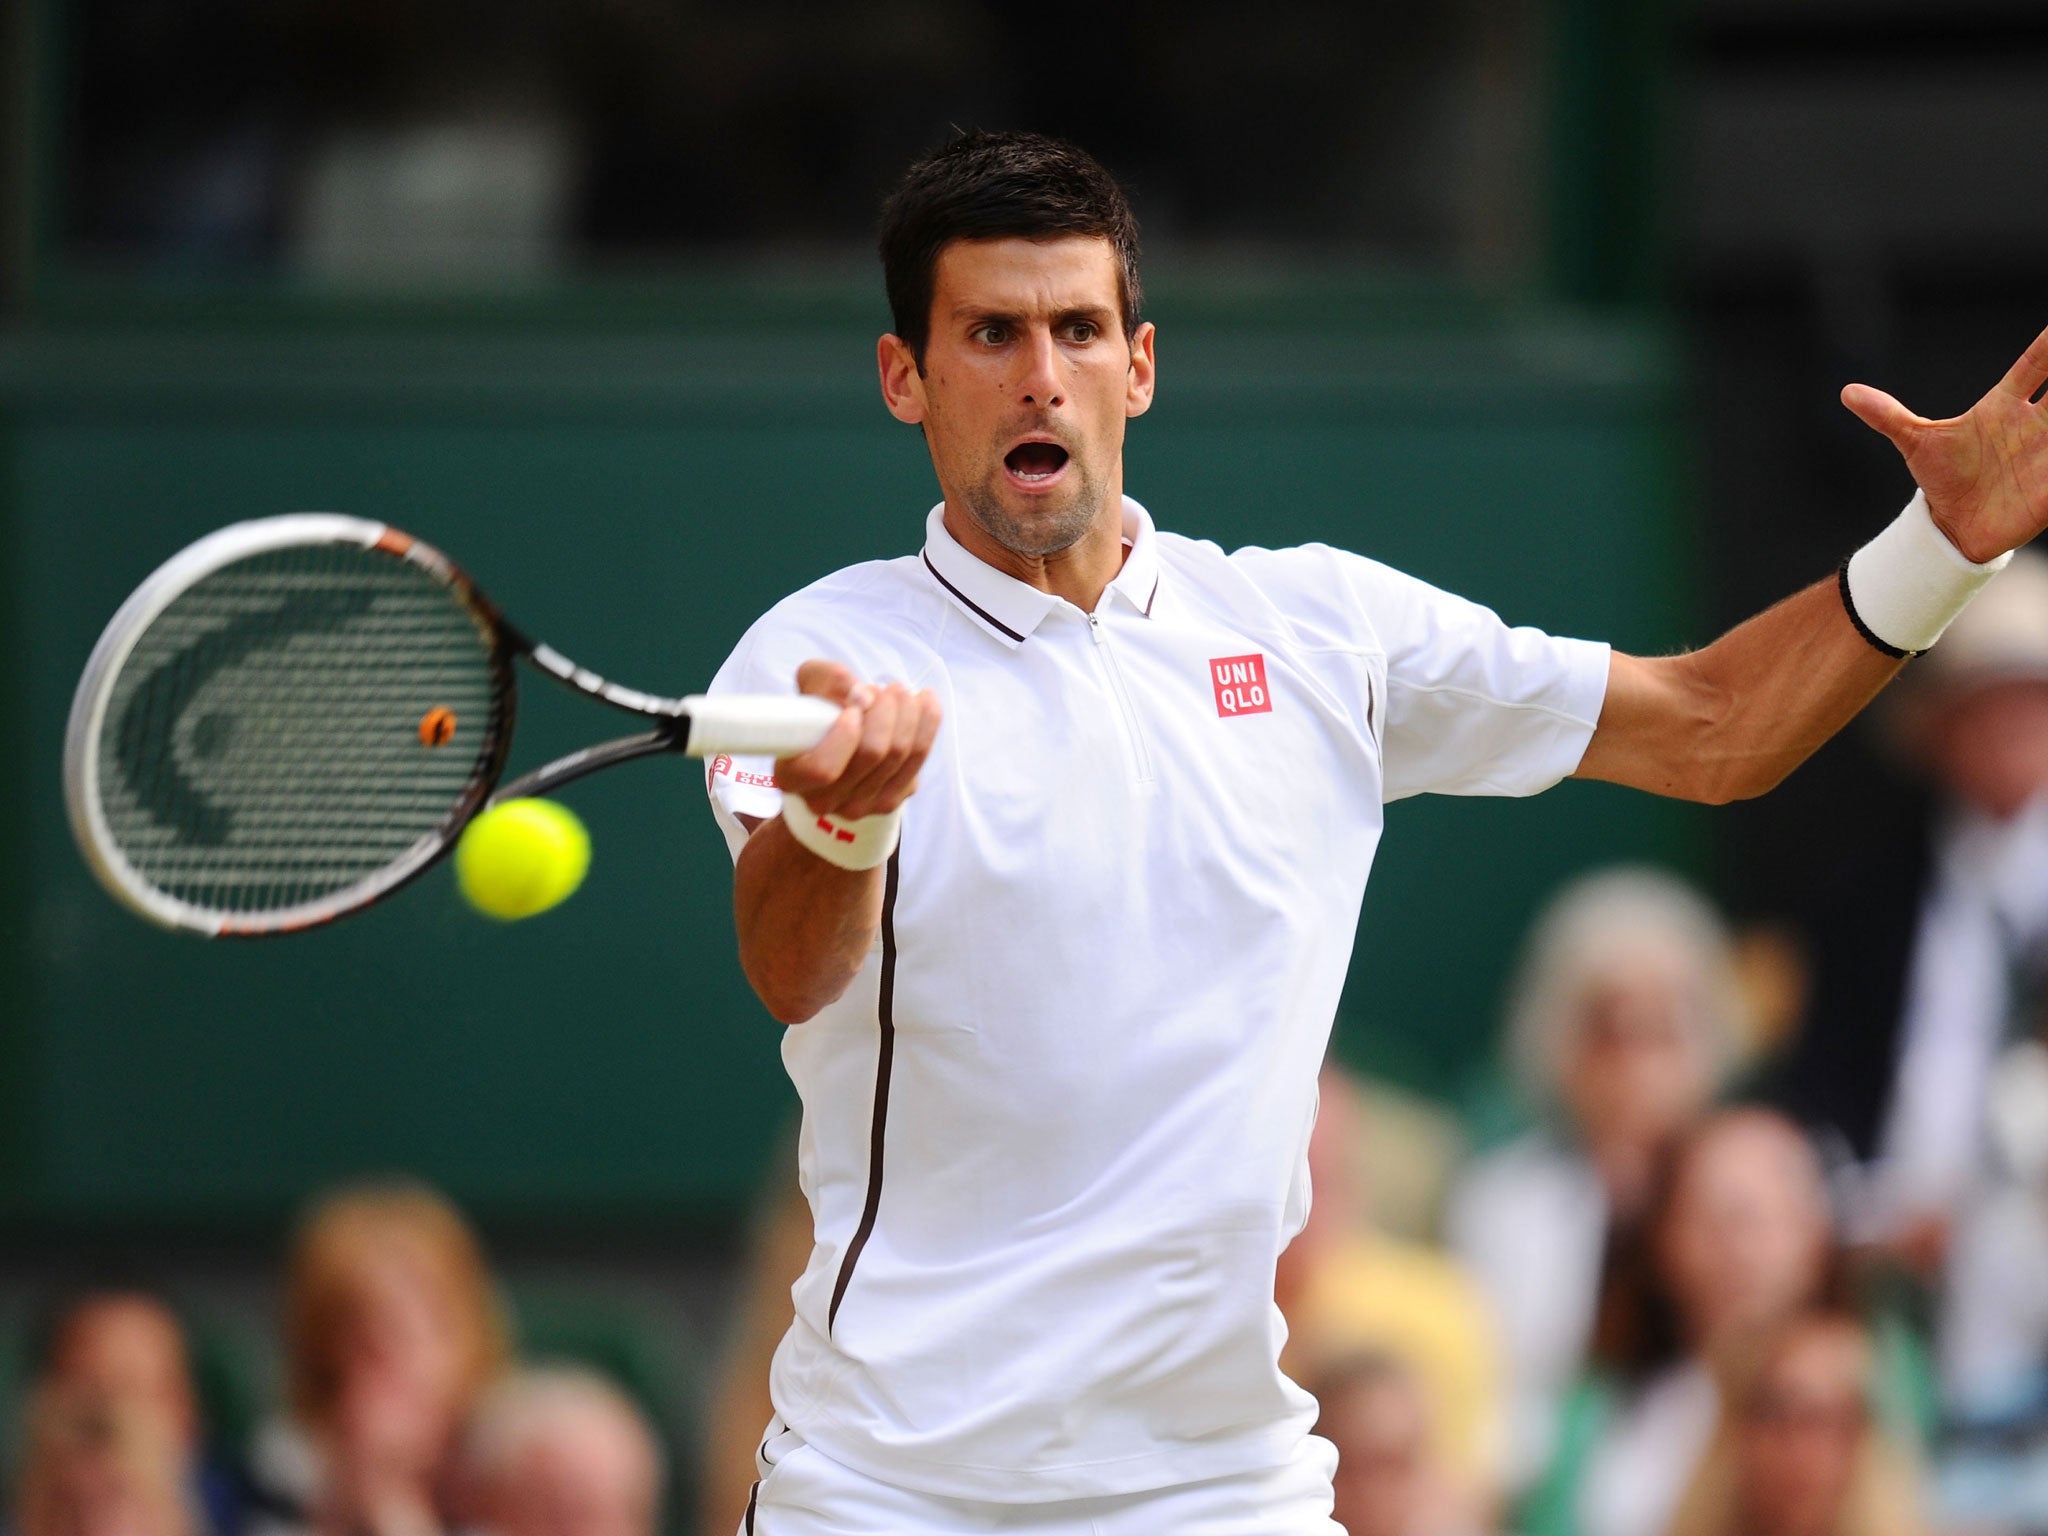 Djokovic disposed of Haas with relative ease